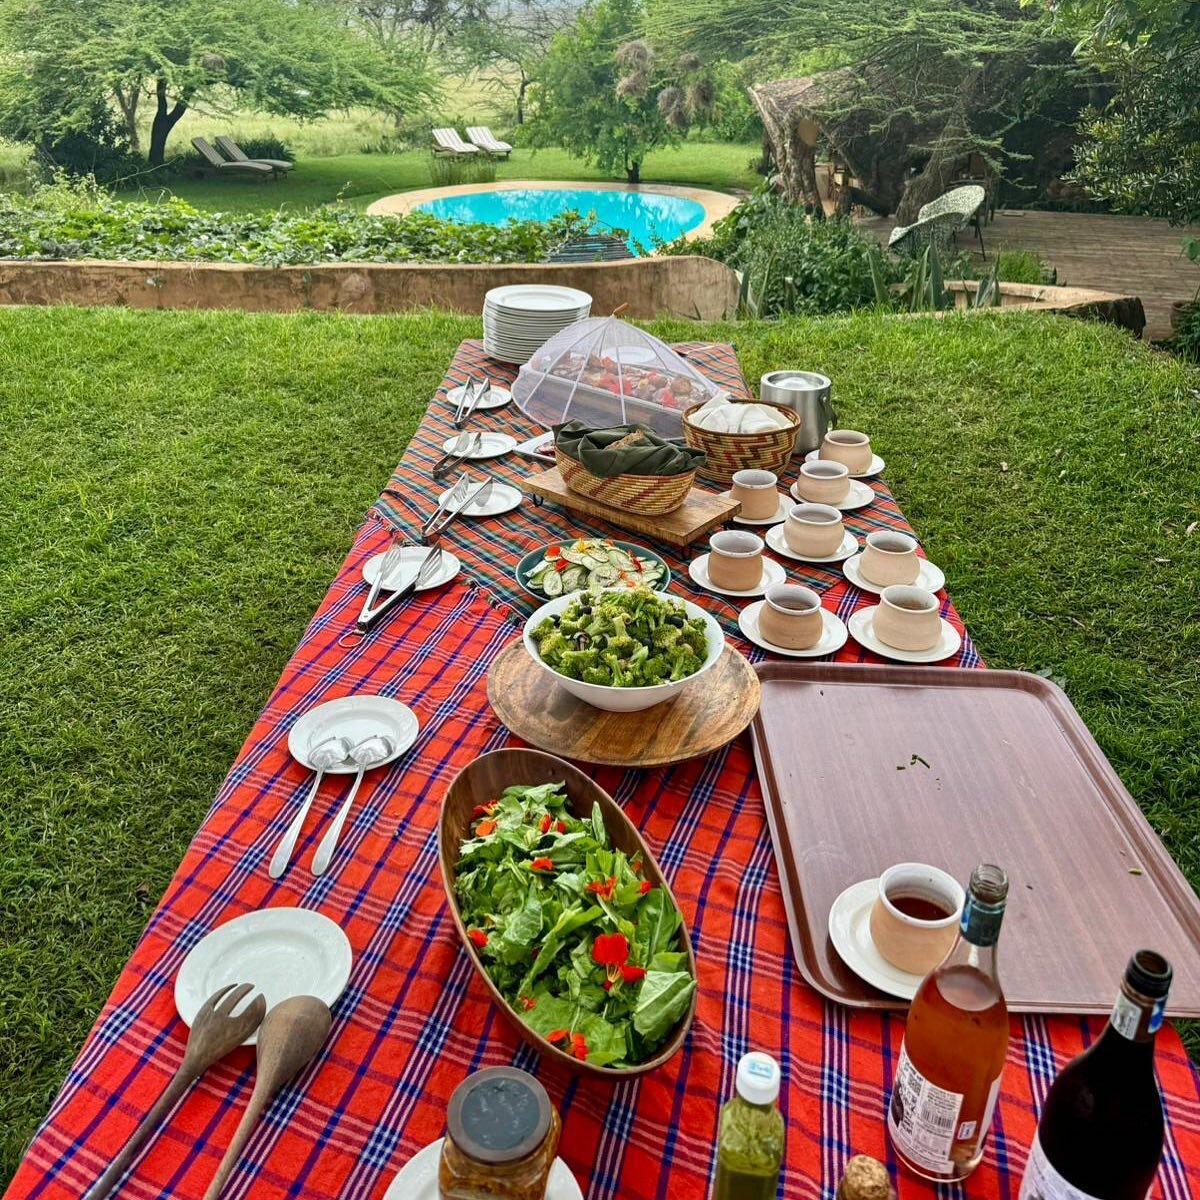 Pool lunches. A luxury setting to relax and unwind before that all important afternoon siesta!

📸 @lewa_house 
📧 bookings@bush-and-beyond.com
📍 @lewa_house 🇰🇪

EXPERIENCE | ESCAPE | EXPLORE

@olmalo @sararacamp @theemakoko @tangulia_mara_camp @h